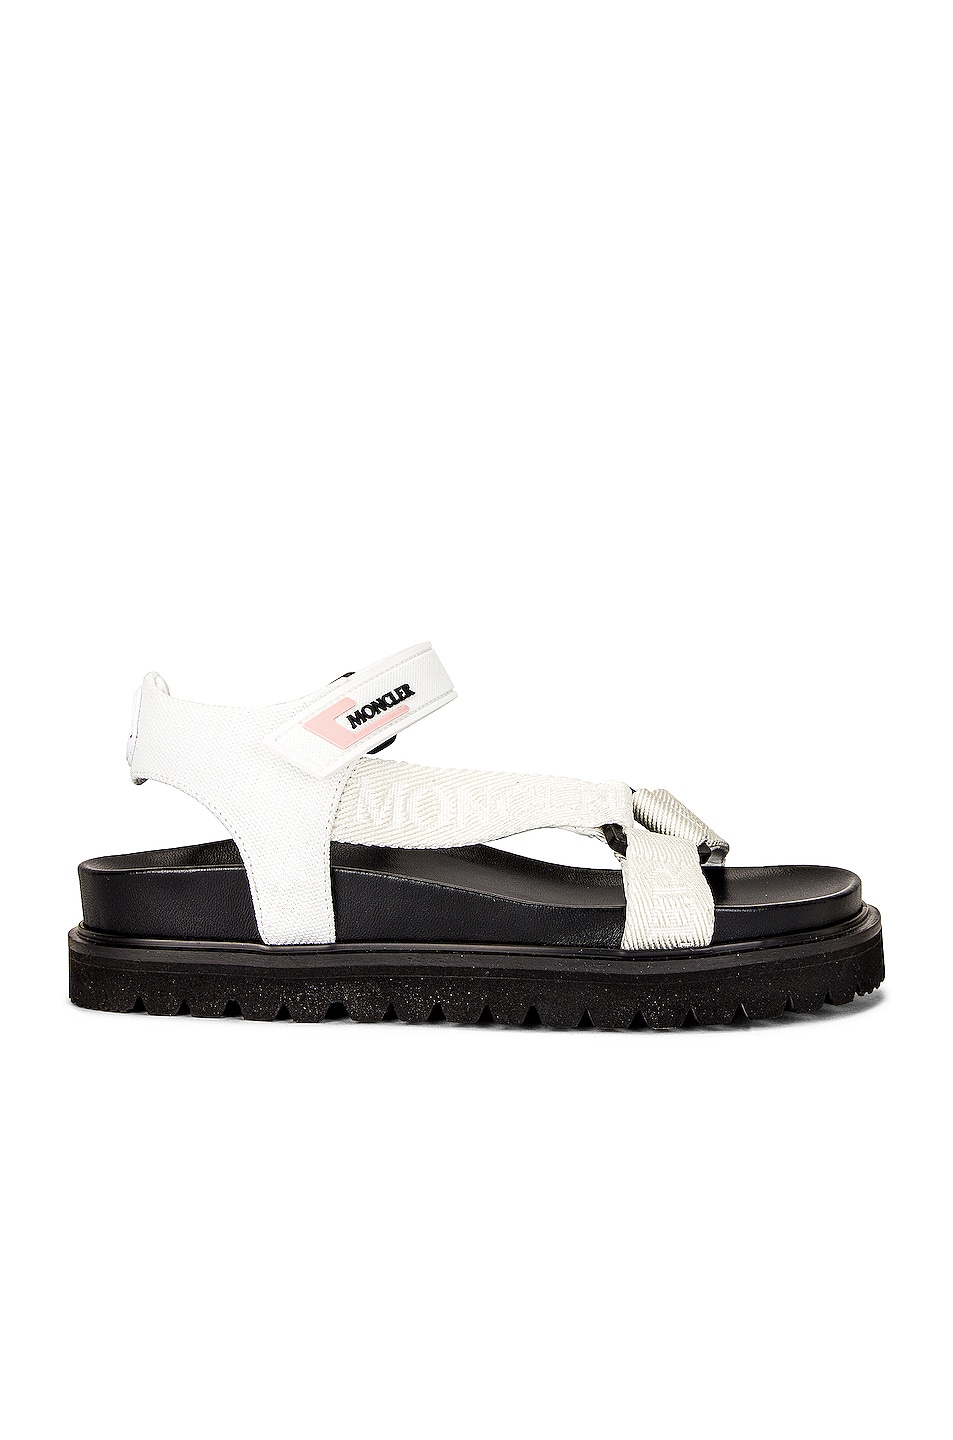 Image 1 of Moncler Flavia Sandal in White